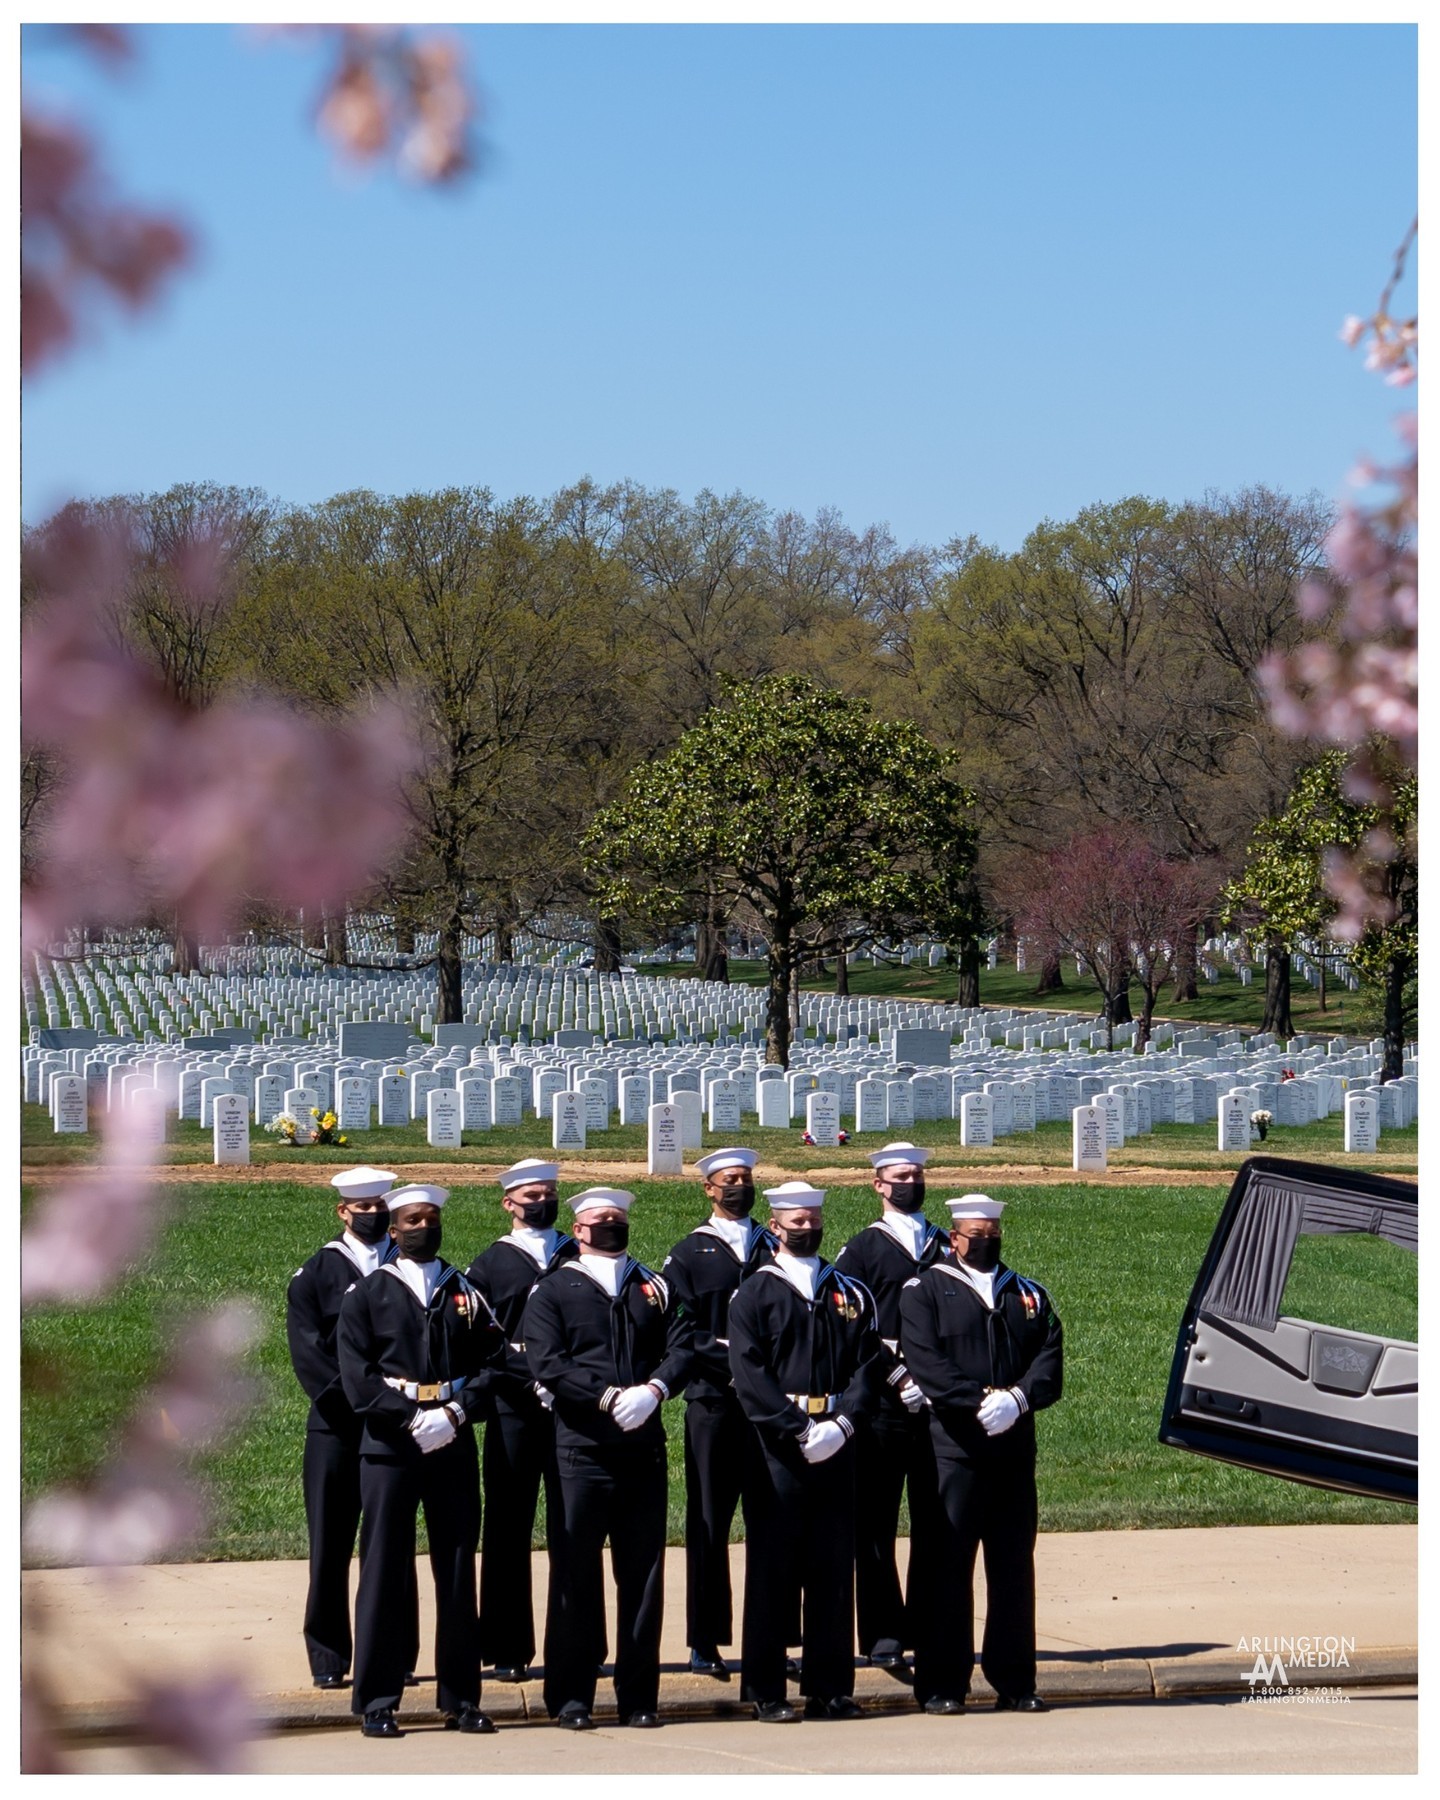 Sailors stand waiting for a full honors service at Marshall Transfer in Arlington National Cemetery.

Marshall Transfer was named after US Supreme Court justice Thurgood Marshall.

Appointed by President Lyndon B. Johnson in 1967, Thurgood Marshall was the first African American Supreme Court justice, and the only black justice during his 24-year tenure. 

Born in Baltimore, Maryland, Marshall attended segregated public schools and experienced racism firsthand. Rejected from the University of Maryland School of Law because he was black, Marshall attended Howard University Law School, graduating first in his class in 1933. After graduation, Marshall began practicing law in his hometown of Baltimore. In his first major court victory, in 1935 he successfully sued the University of Maryland Law School for denying admission to a black applicant on the grounds of race. In 1940, he founded and served as executive director of the NAACP Legal Defense and Educational Fund. In that position, he argued numerous cases before the Supreme Court — including Brown v. Board of Education (1954), which held that the racial segregation of public schools violated the Constitution. Marshall won 29 of the 32 cases that he argued before the Supreme Court. 

In 1961, President John F. Kennedy appointed Marshall to the U.S. Court of Appeals for the Second Circuit, and in 1965 President Johnson appointed him as Solicitor General — making him, at the time, the highest-ranking black government official in U.S. history. 

On the Supreme Court, Marshall consistently defended the constitutional protection of individual rights, including the rights of criminal defendants. He also continued advocating for the civil rights of African Americans and other minorities. He famously described his legal philosophy as, "You do what you think is right, and the law will catch up." Marshall's clerks included current Supreme Court Justice Elena Kagan and such renowned law professors as Cass Sunstein and Randall L. Kennedy.